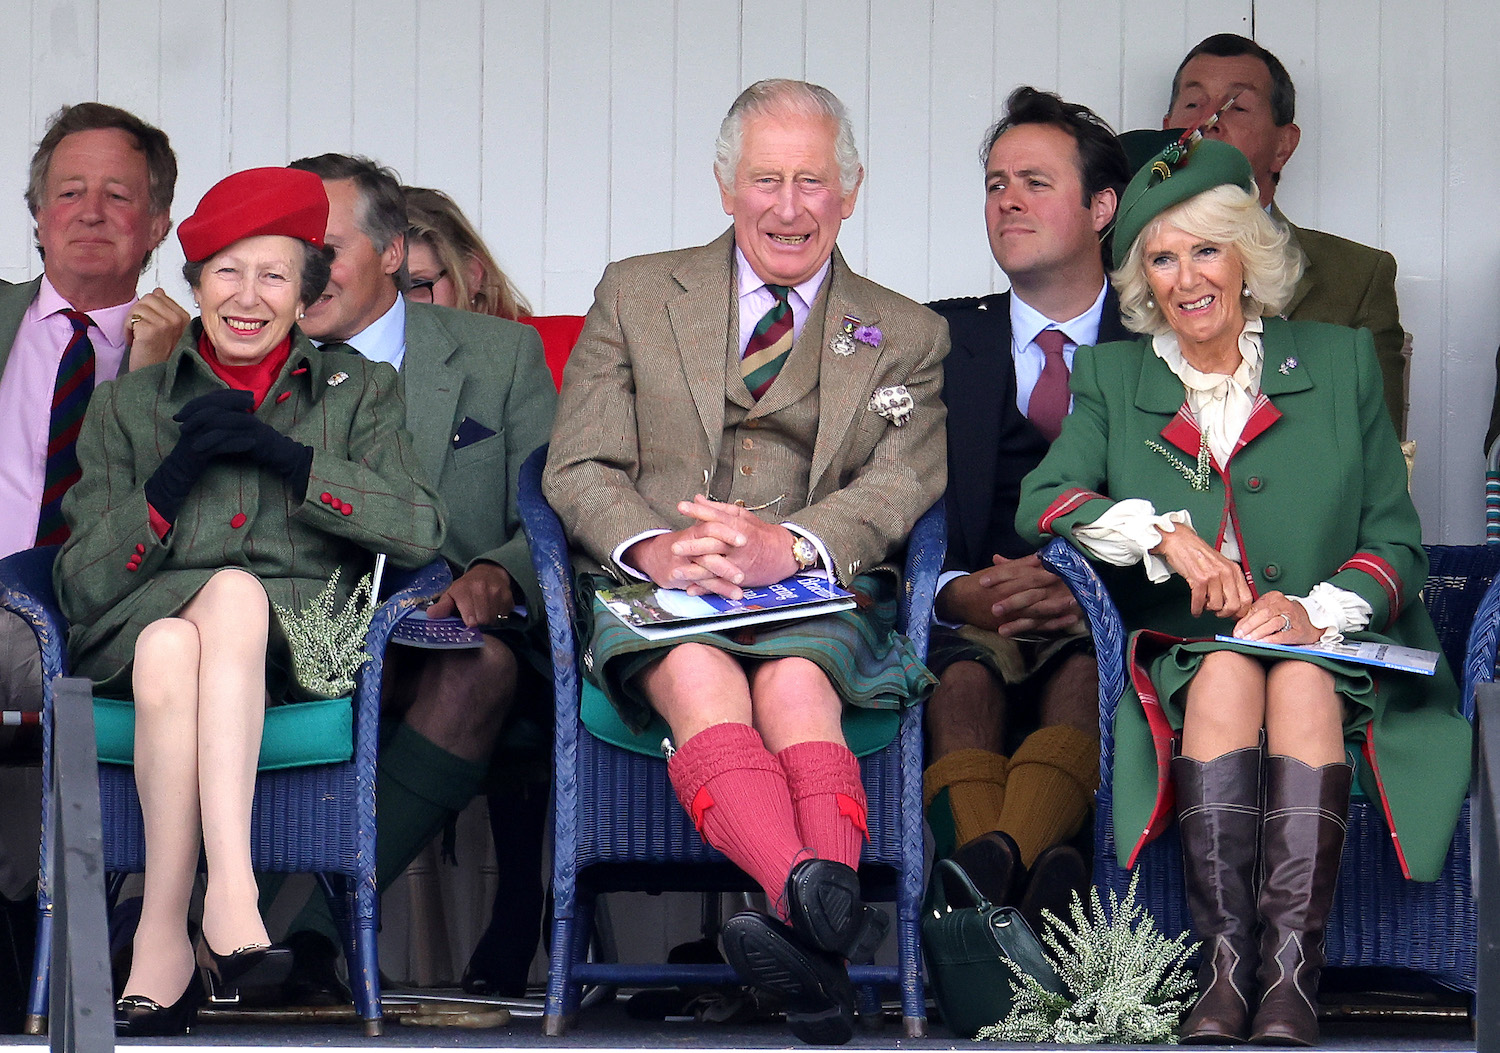 Princess Anne and Camilla Parker Bowles body language indicates friendship and ease